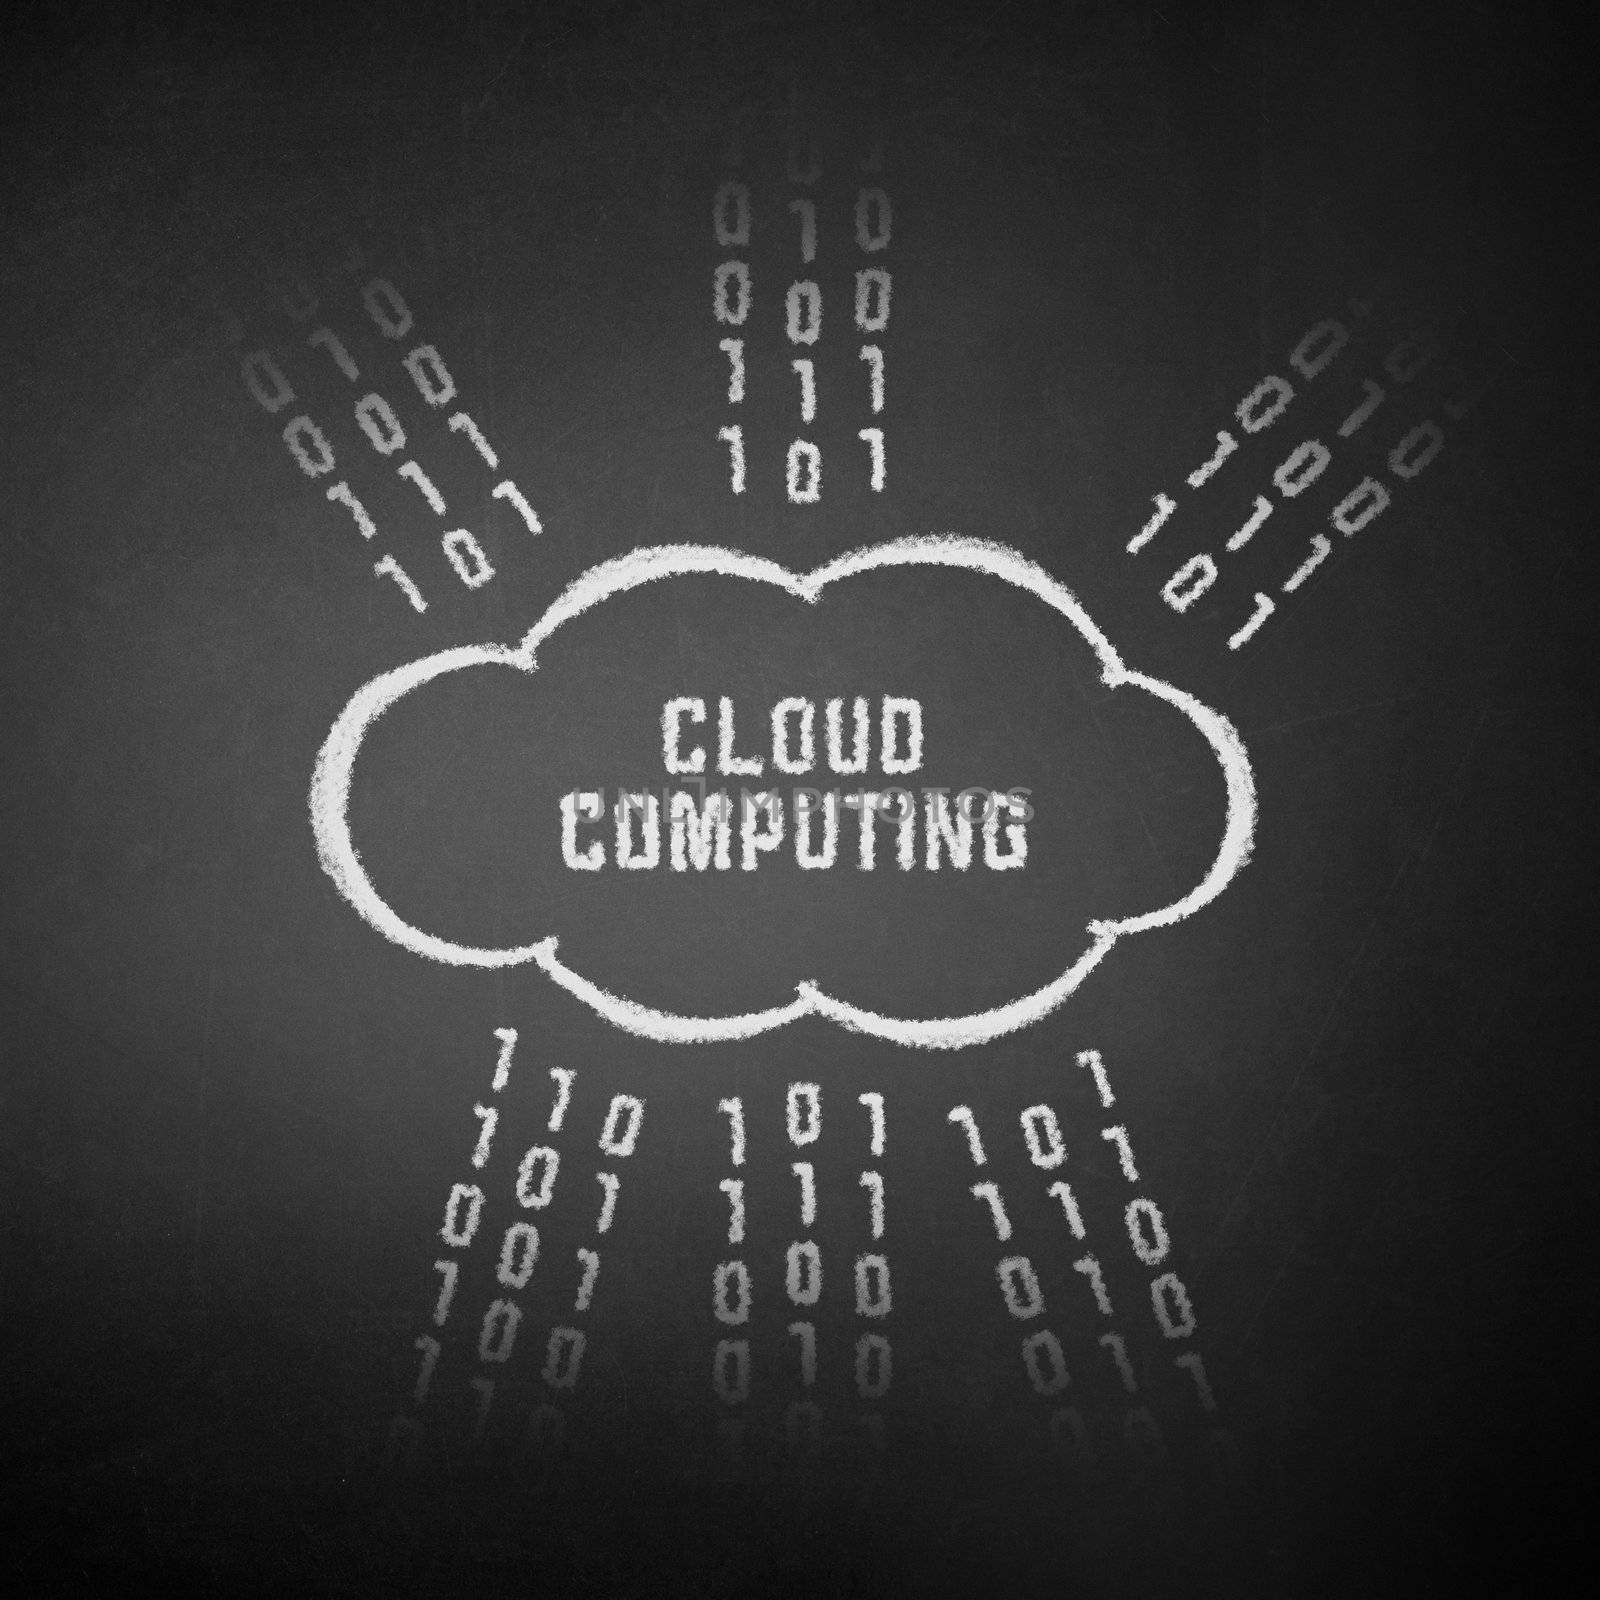 Conceptual picture on cloud computing theme. Drawing on textured background.